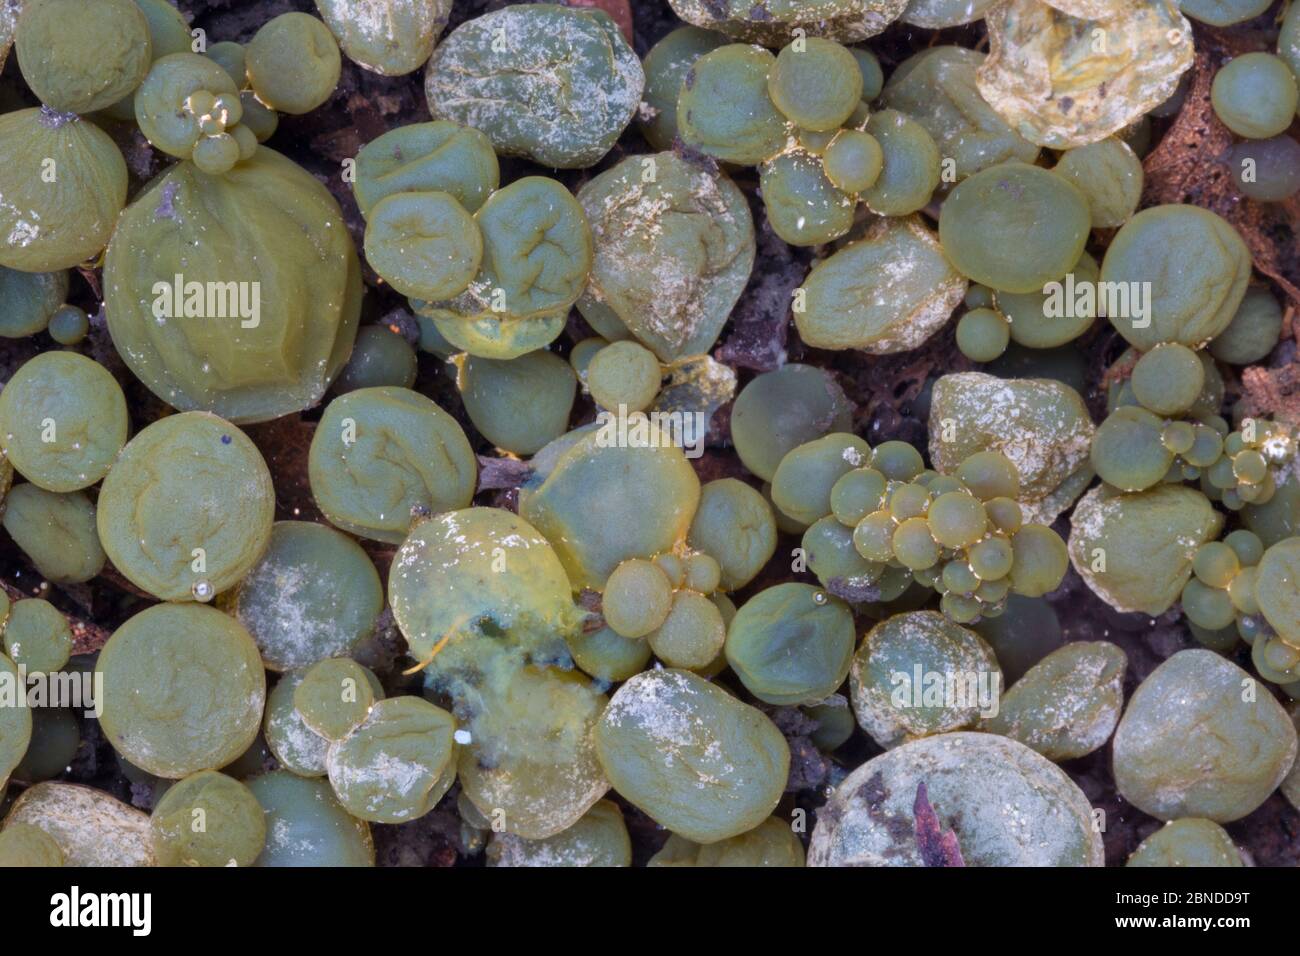 Freshwater grapes (Nostoc sp.), a blue-green algae or cyanobacteria, found in a shallow freshwater pool on an area of limestone pavement. Gait Barrows Stock Photo